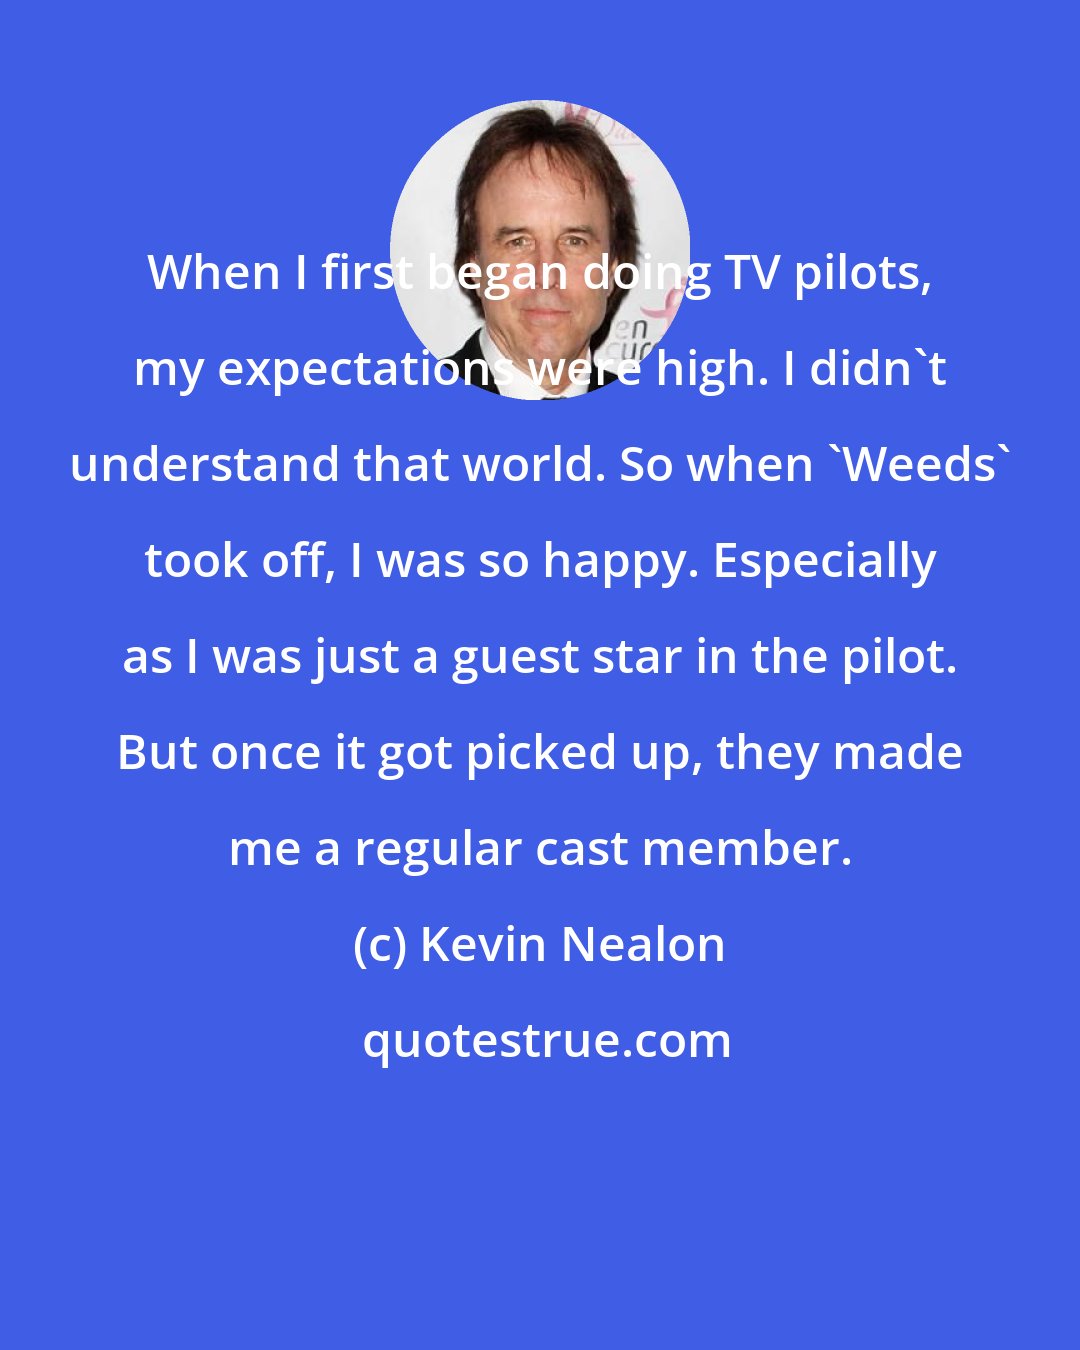 Kevin Nealon: When I first began doing TV pilots, my expectations were high. I didn't understand that world. So when 'Weeds' took off, I was so happy. Especially as I was just a guest star in the pilot. But once it got picked up, they made me a regular cast member.